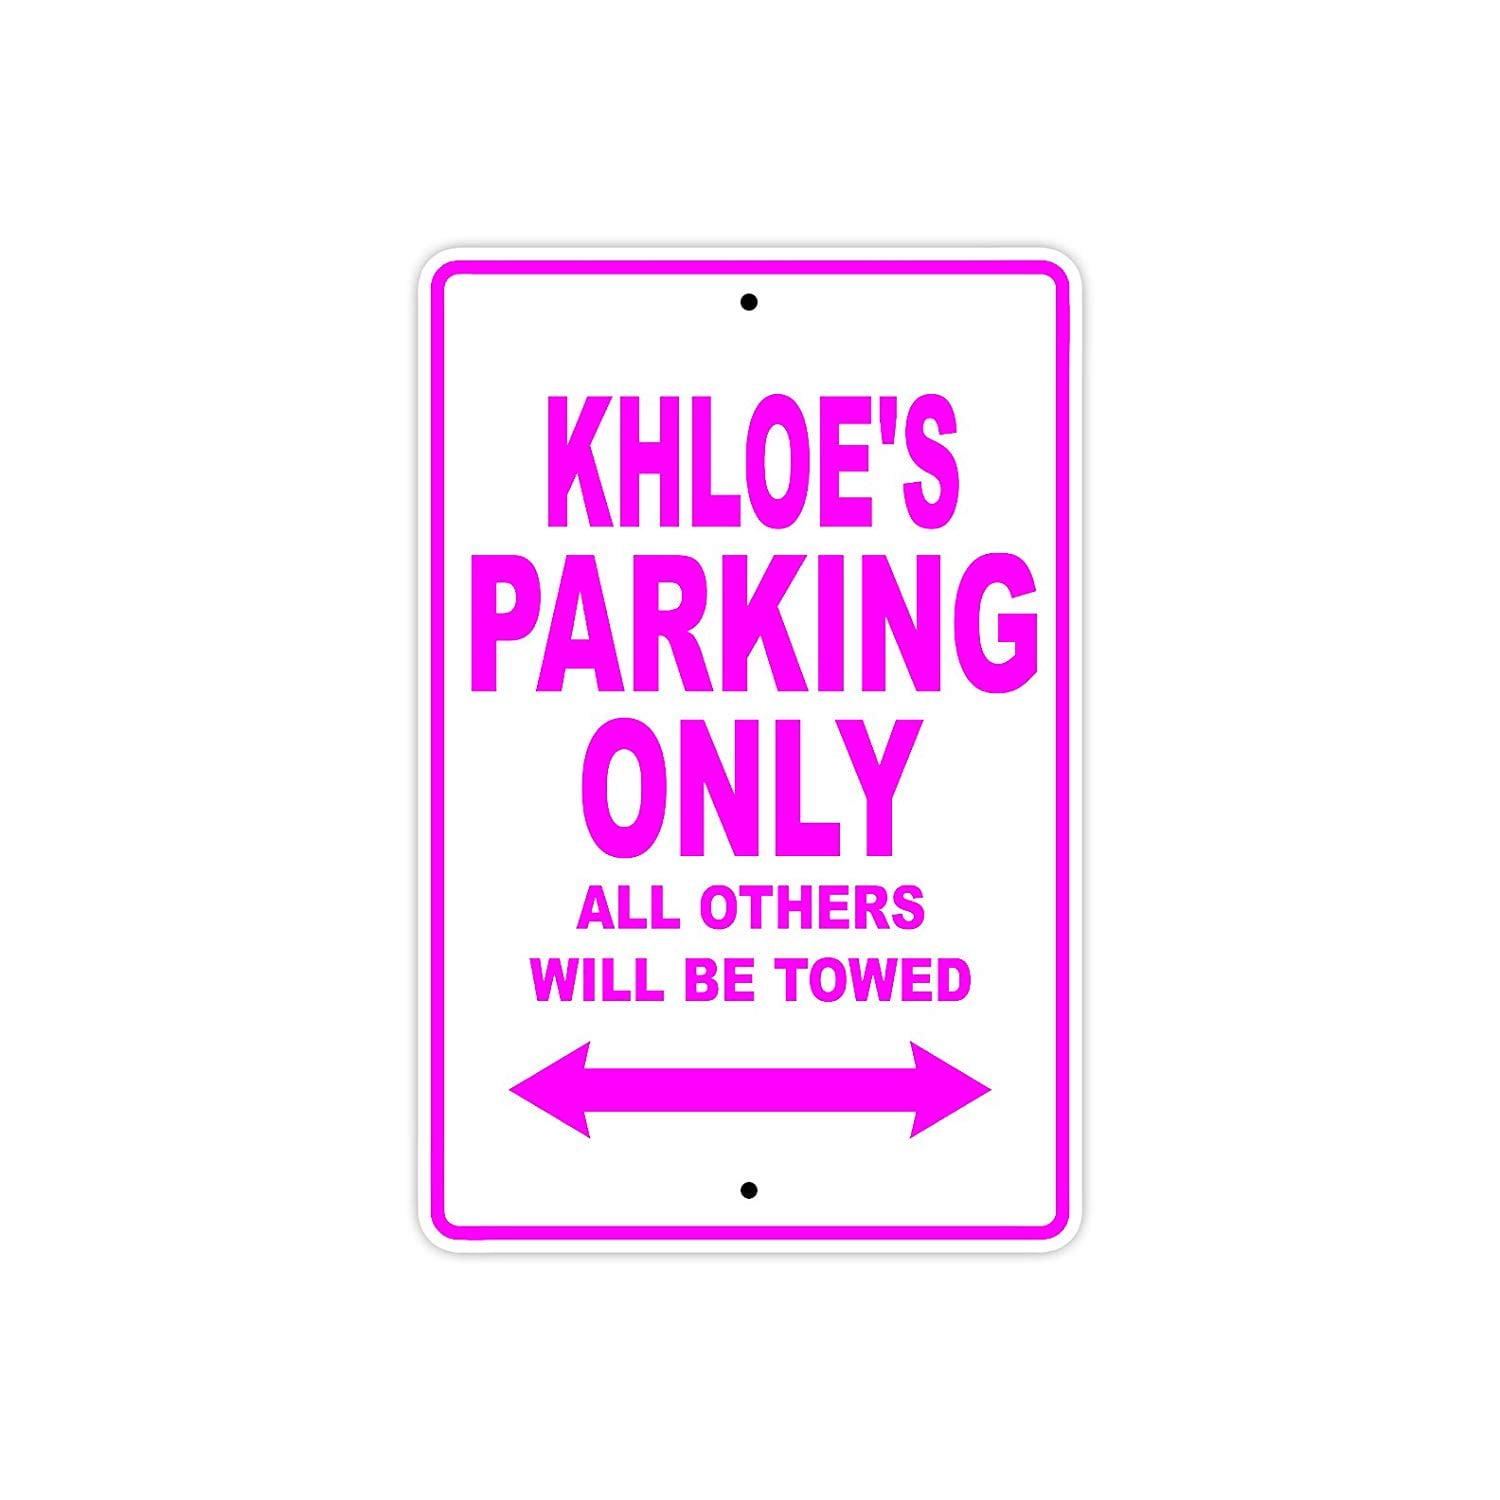 Chechenia Country Parking Only Others Deported Chechen 12X18 Aluminum Metal Sign